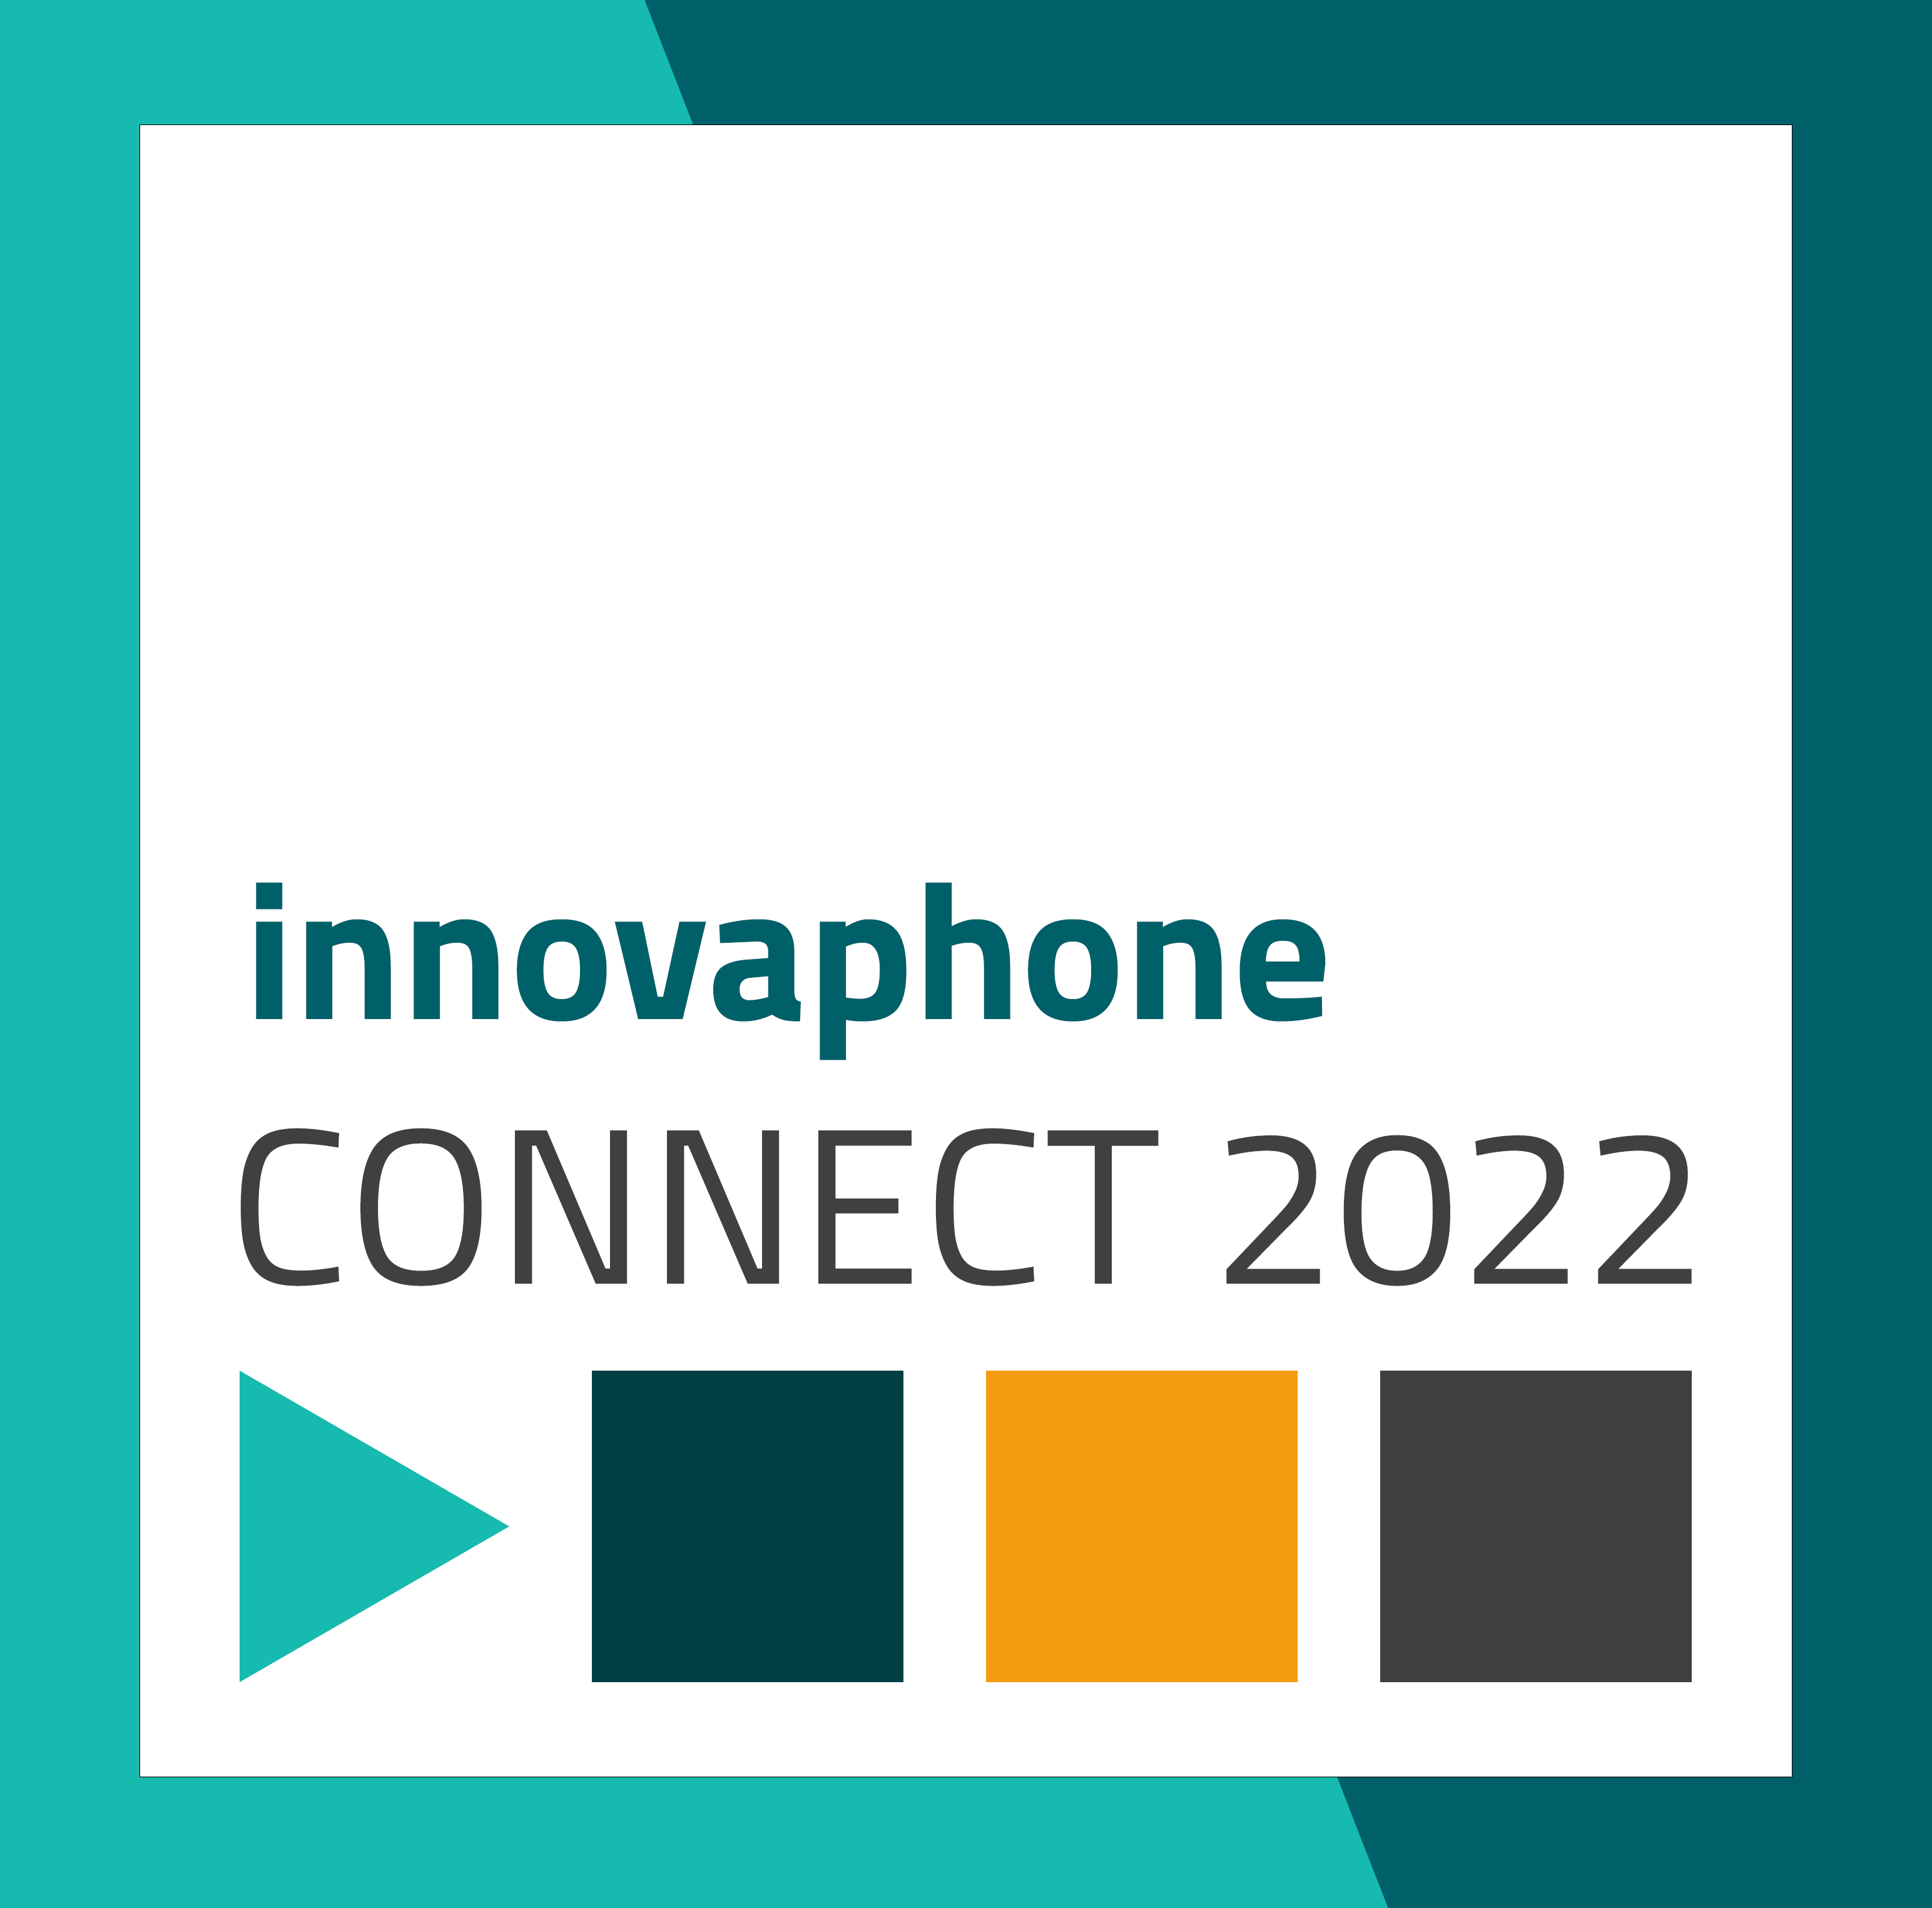 Messe innovaphone CONNECT 2022